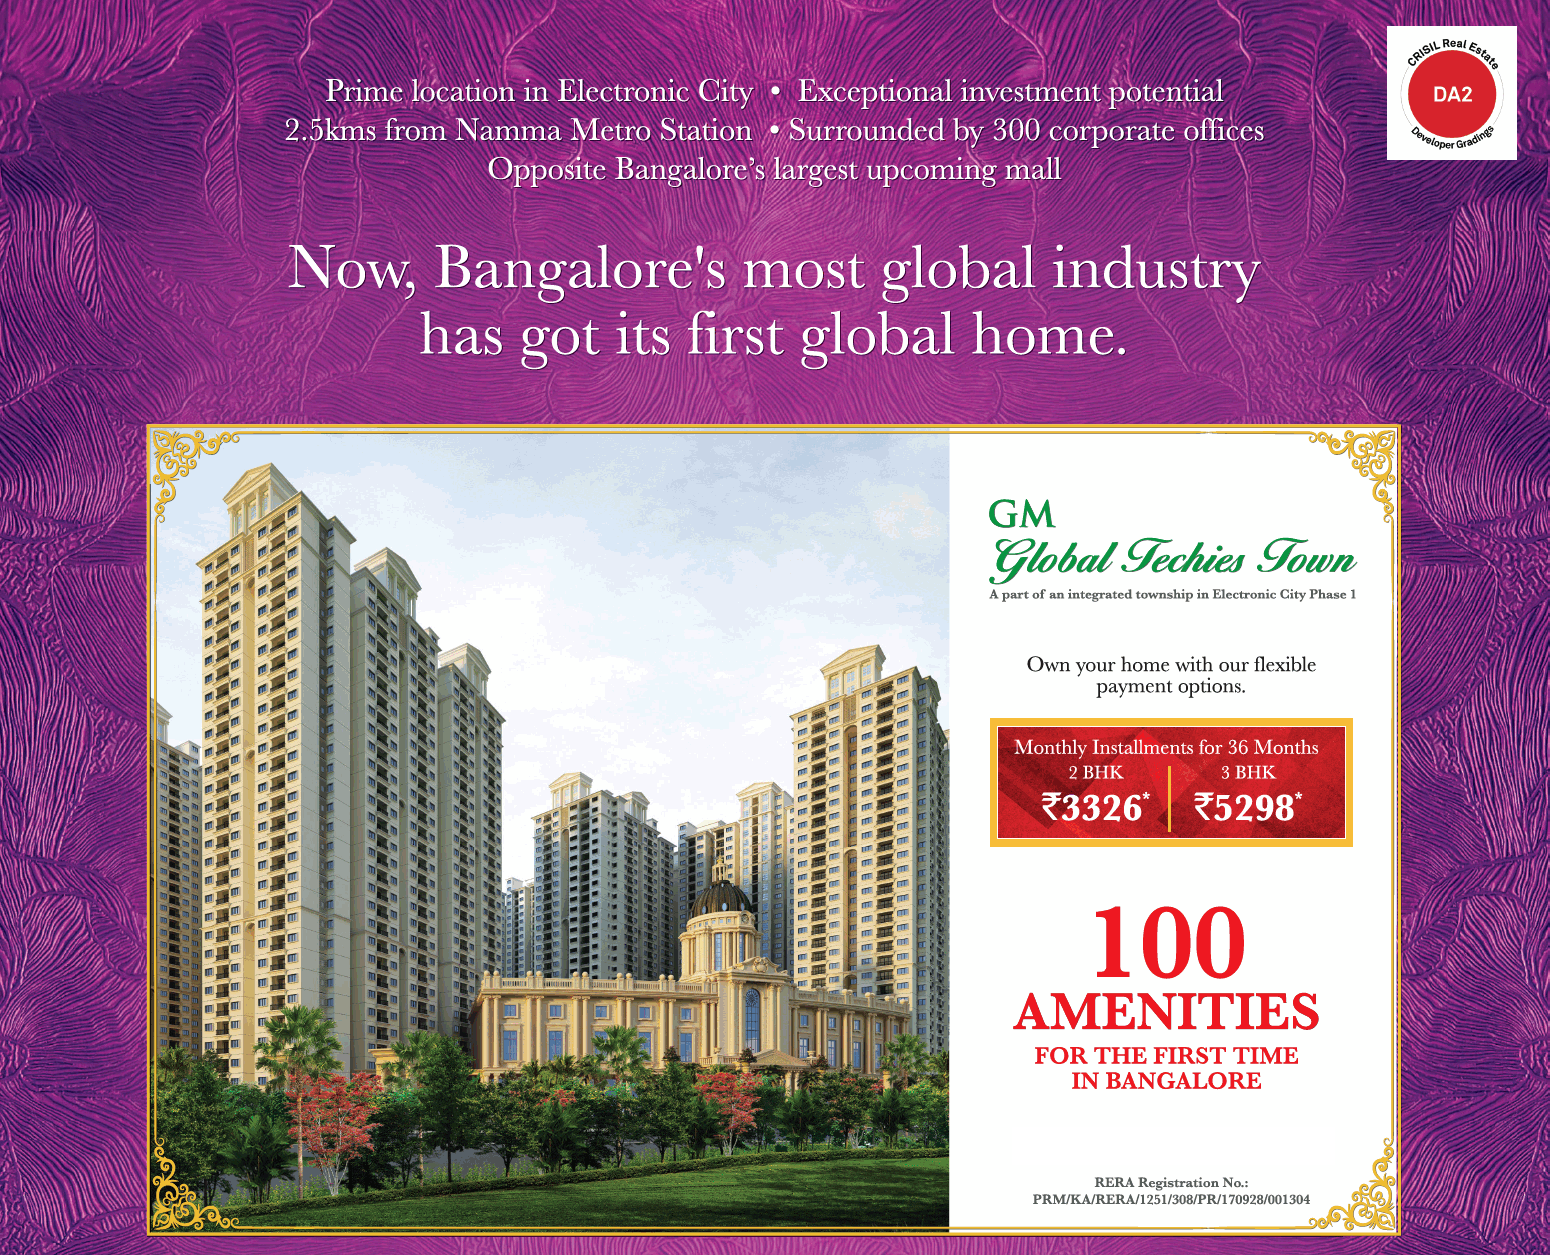 Avail 100 amenities for the first time at Global Techies Town in Bangalore